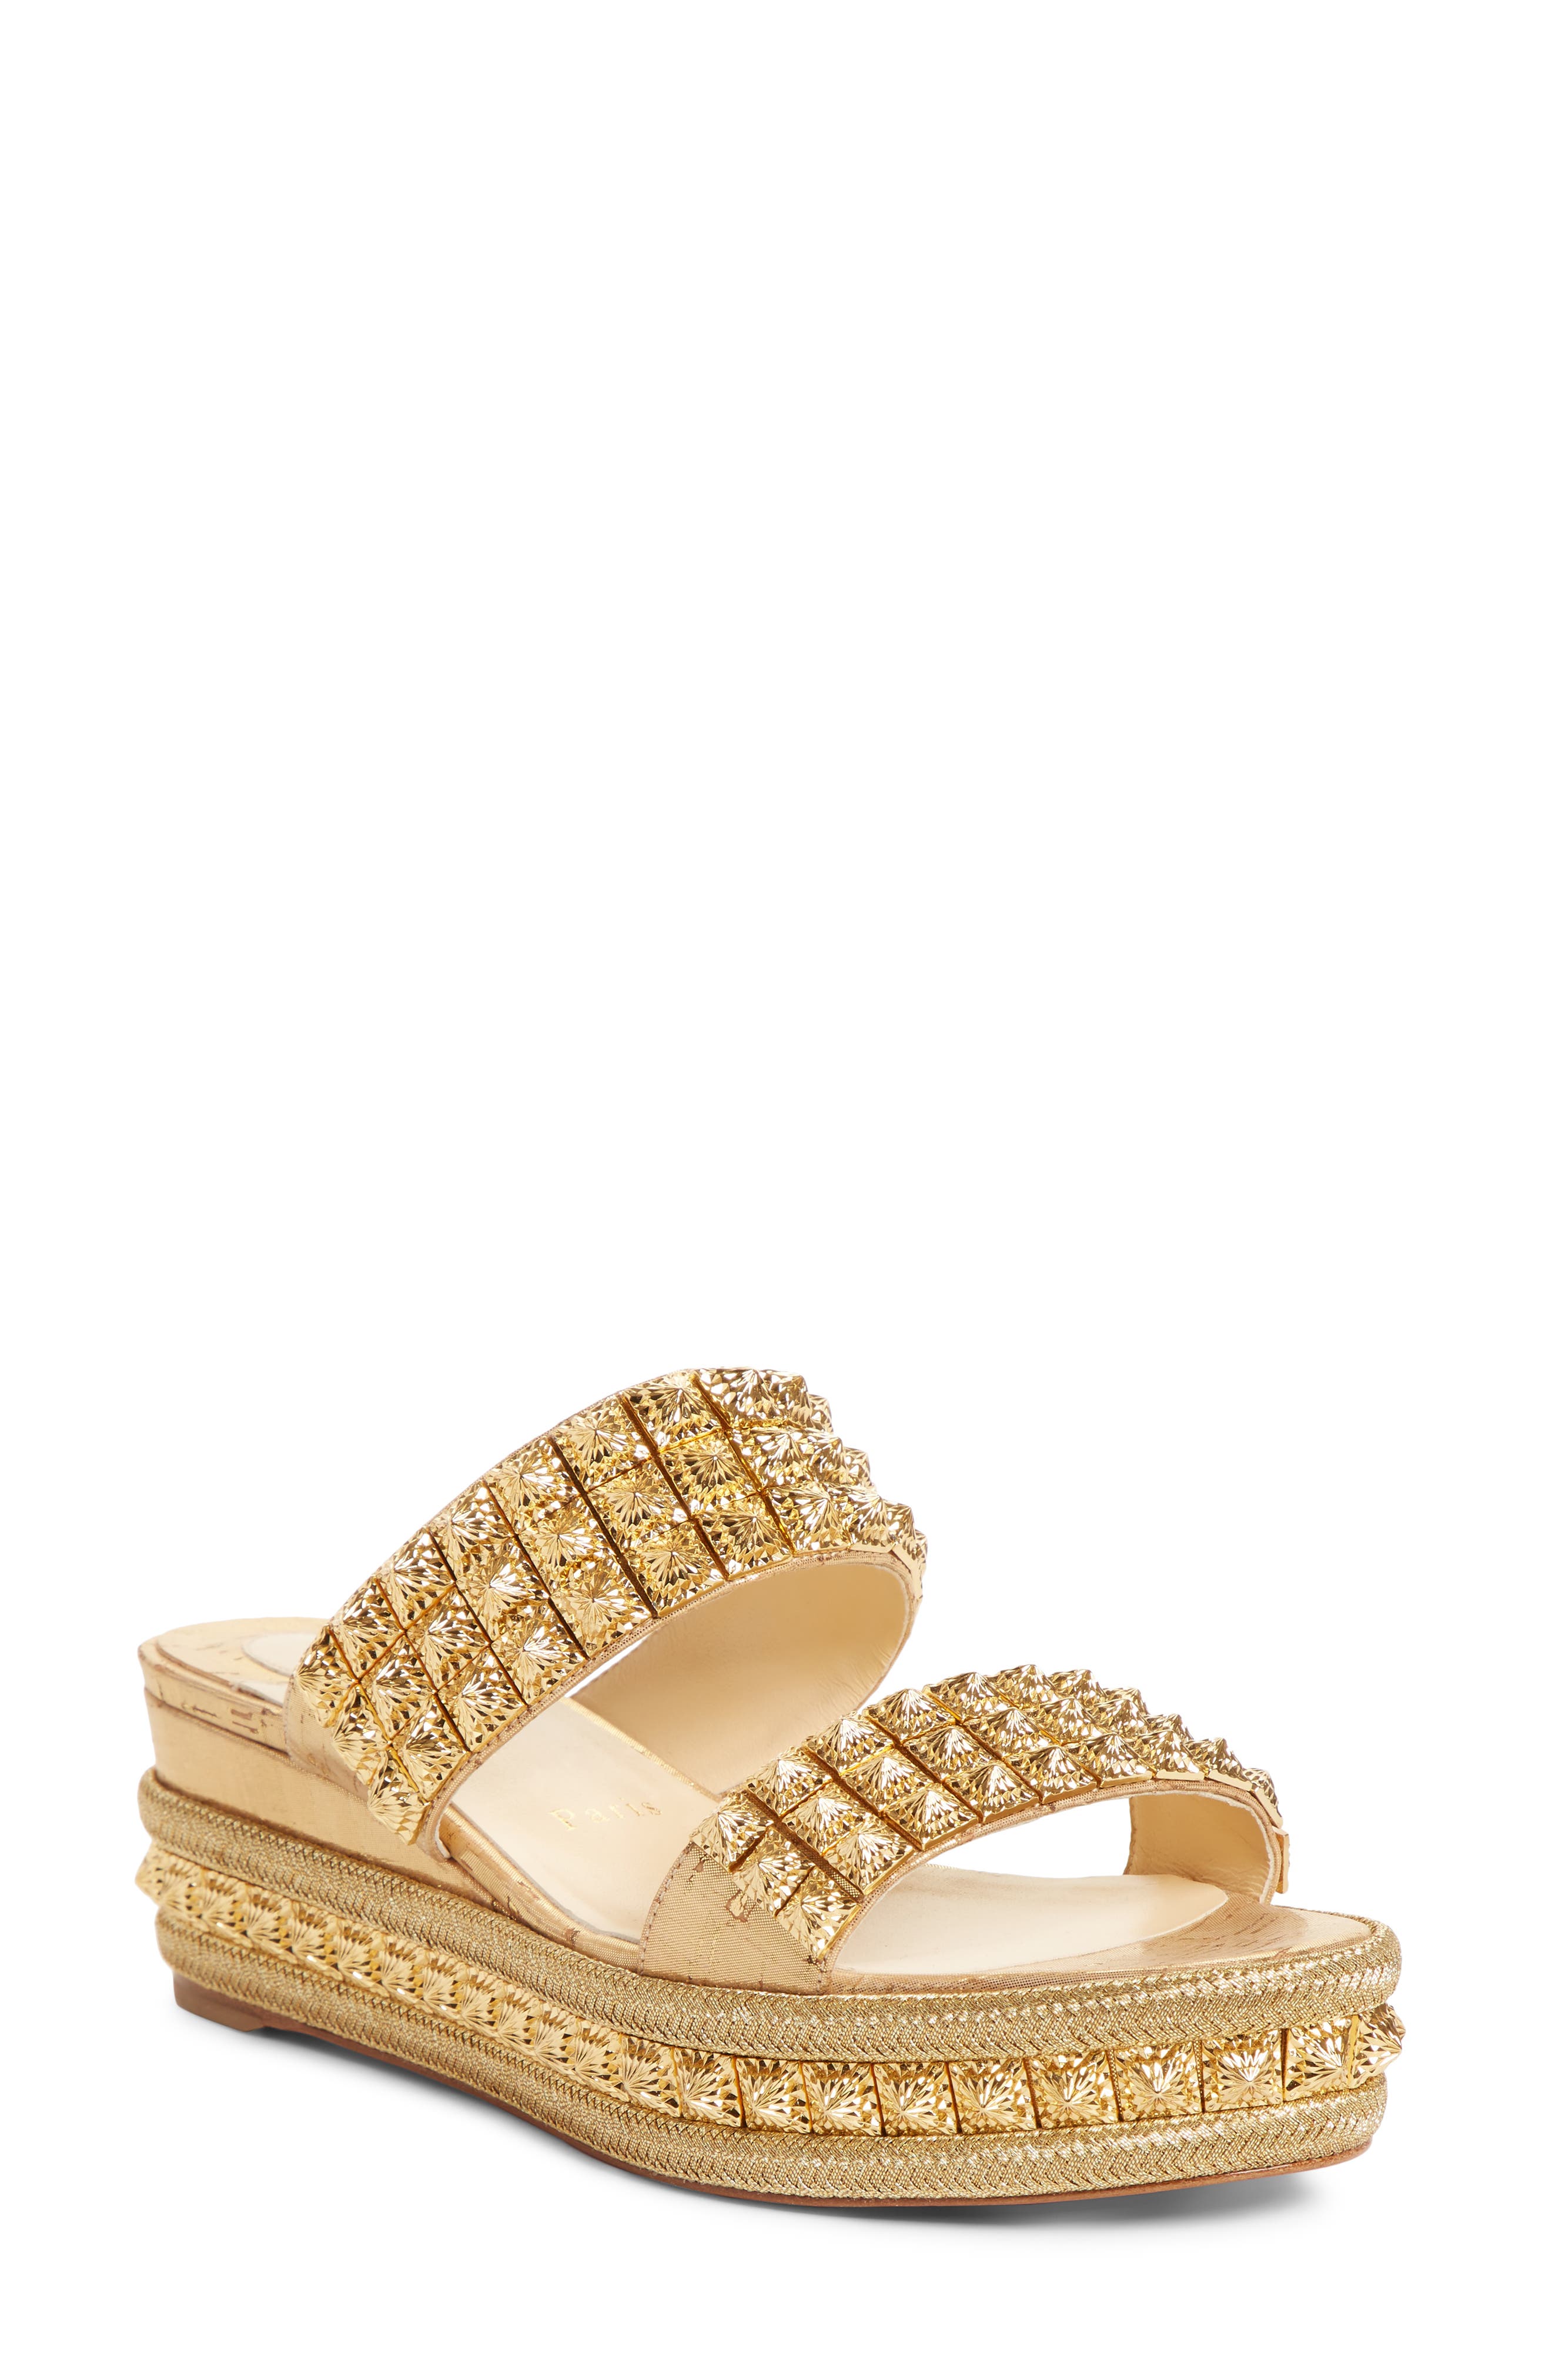 christian louboutin gold wedges